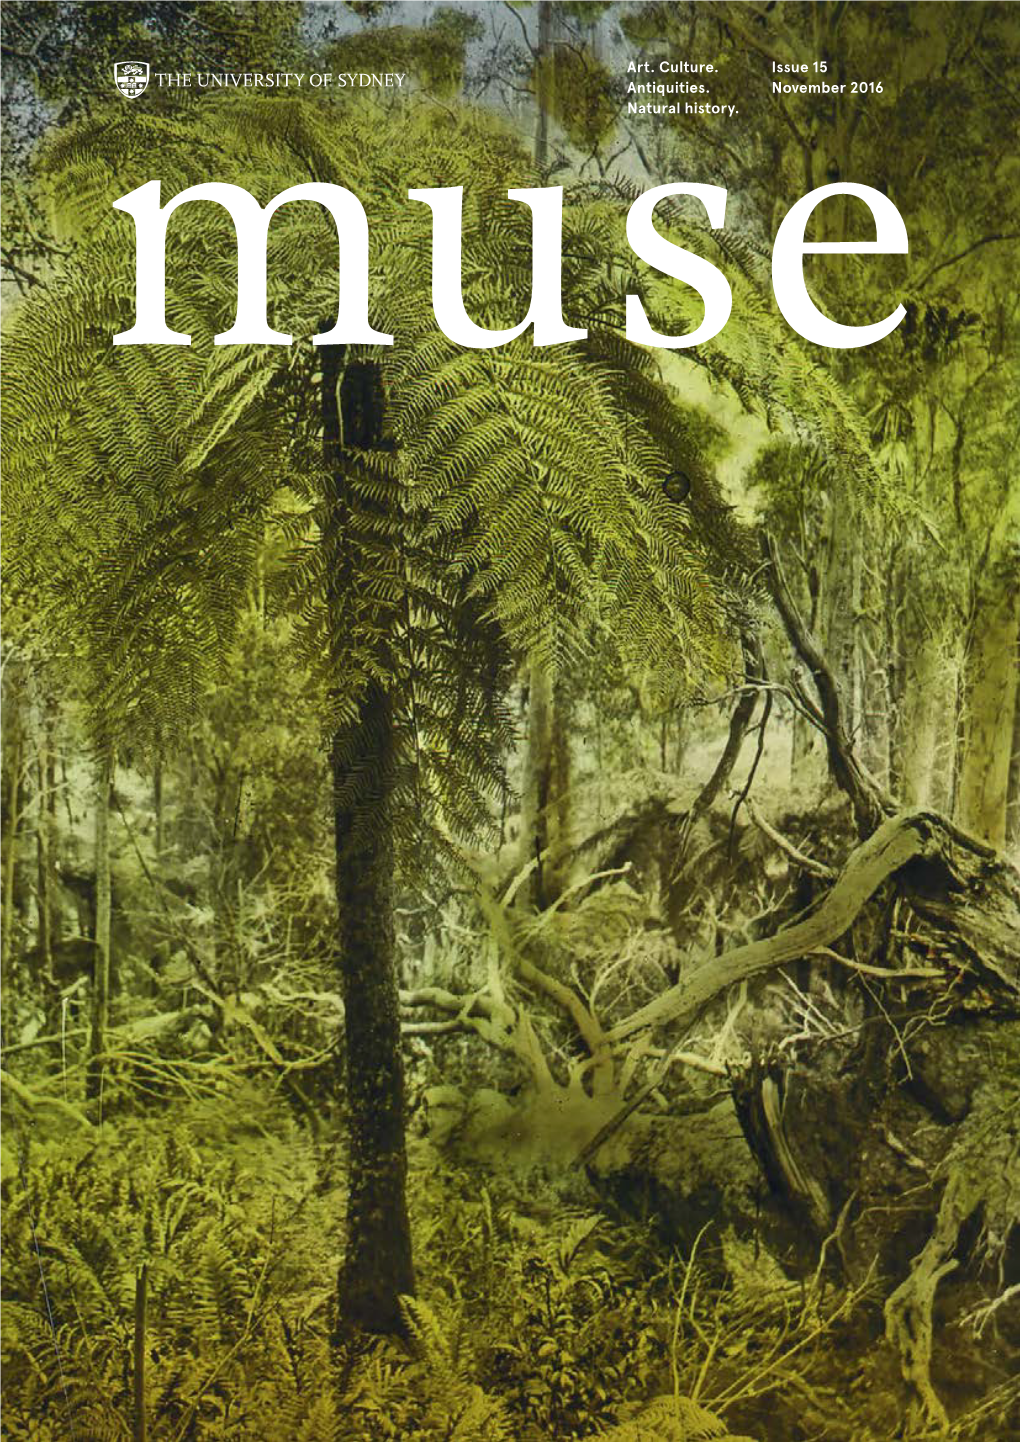 MUSE Issue 15, November 2016